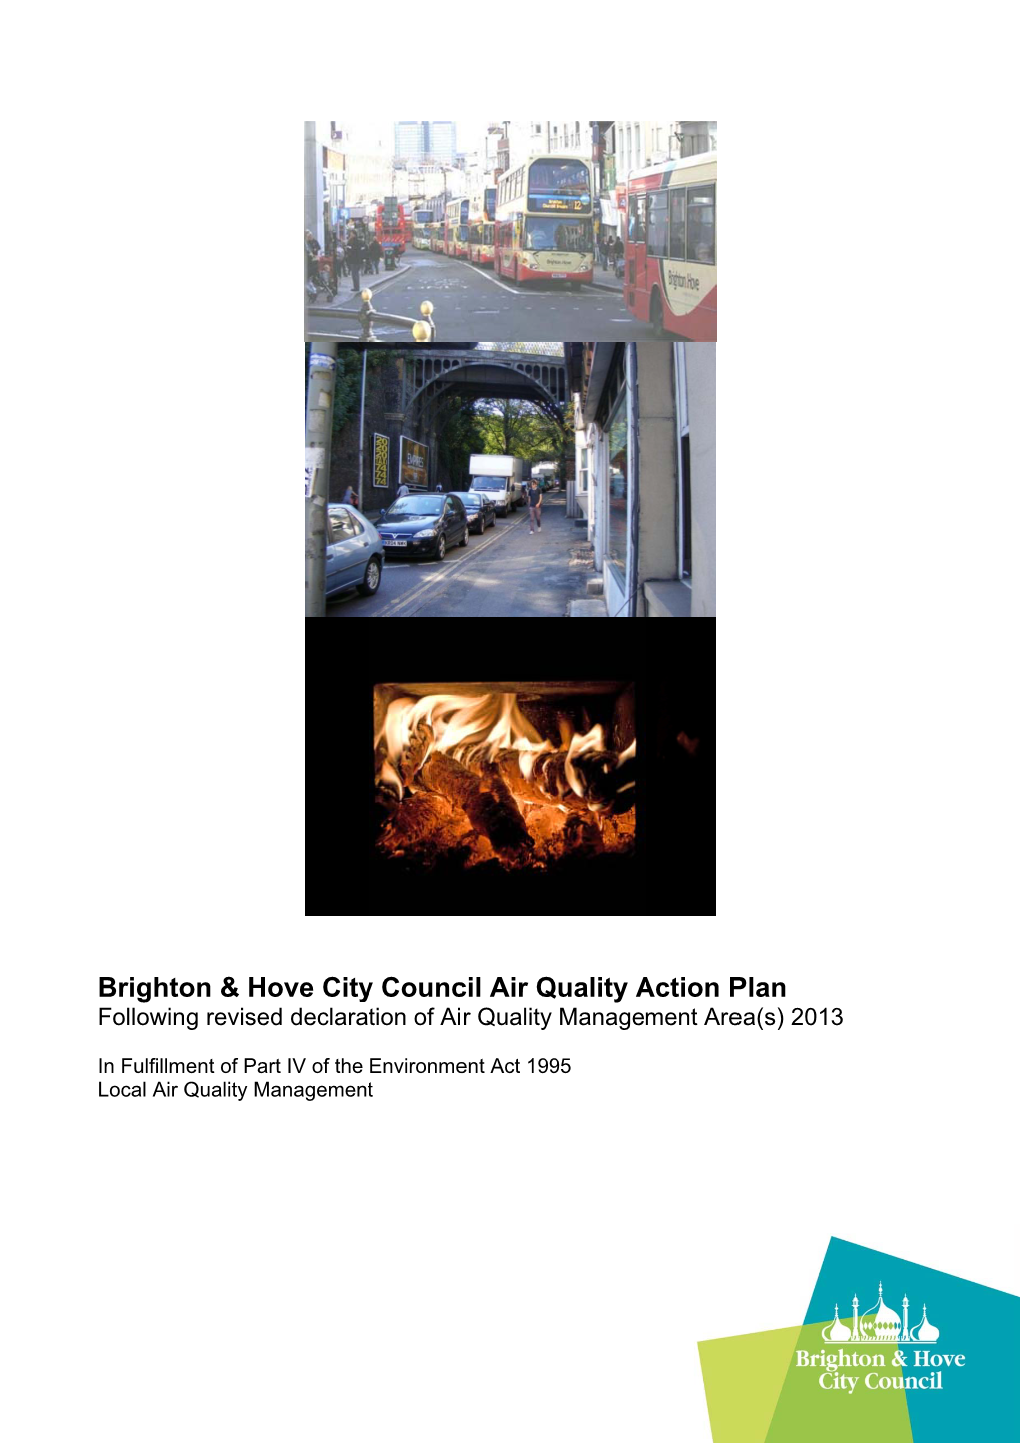 Air Quality Action Plan Following Revised Declaration of Air Quality Management Area(S) 2013